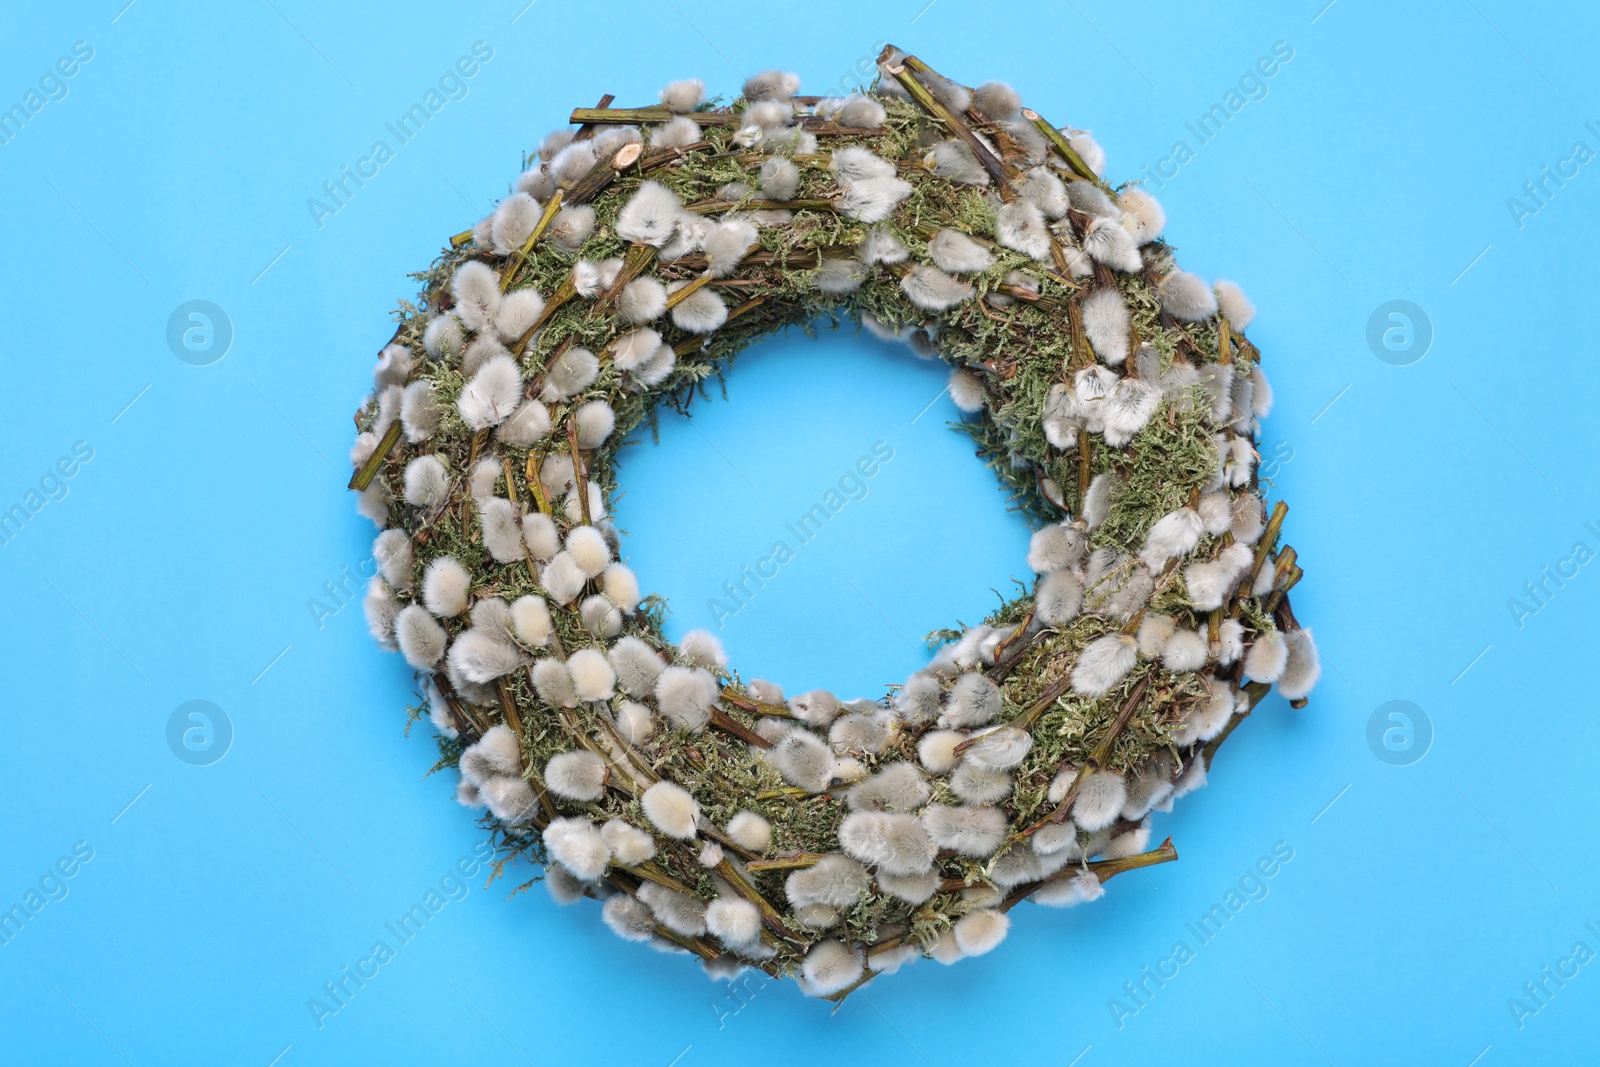 Photo of Wreath made of beautiful willow flowers on light blue background, top view